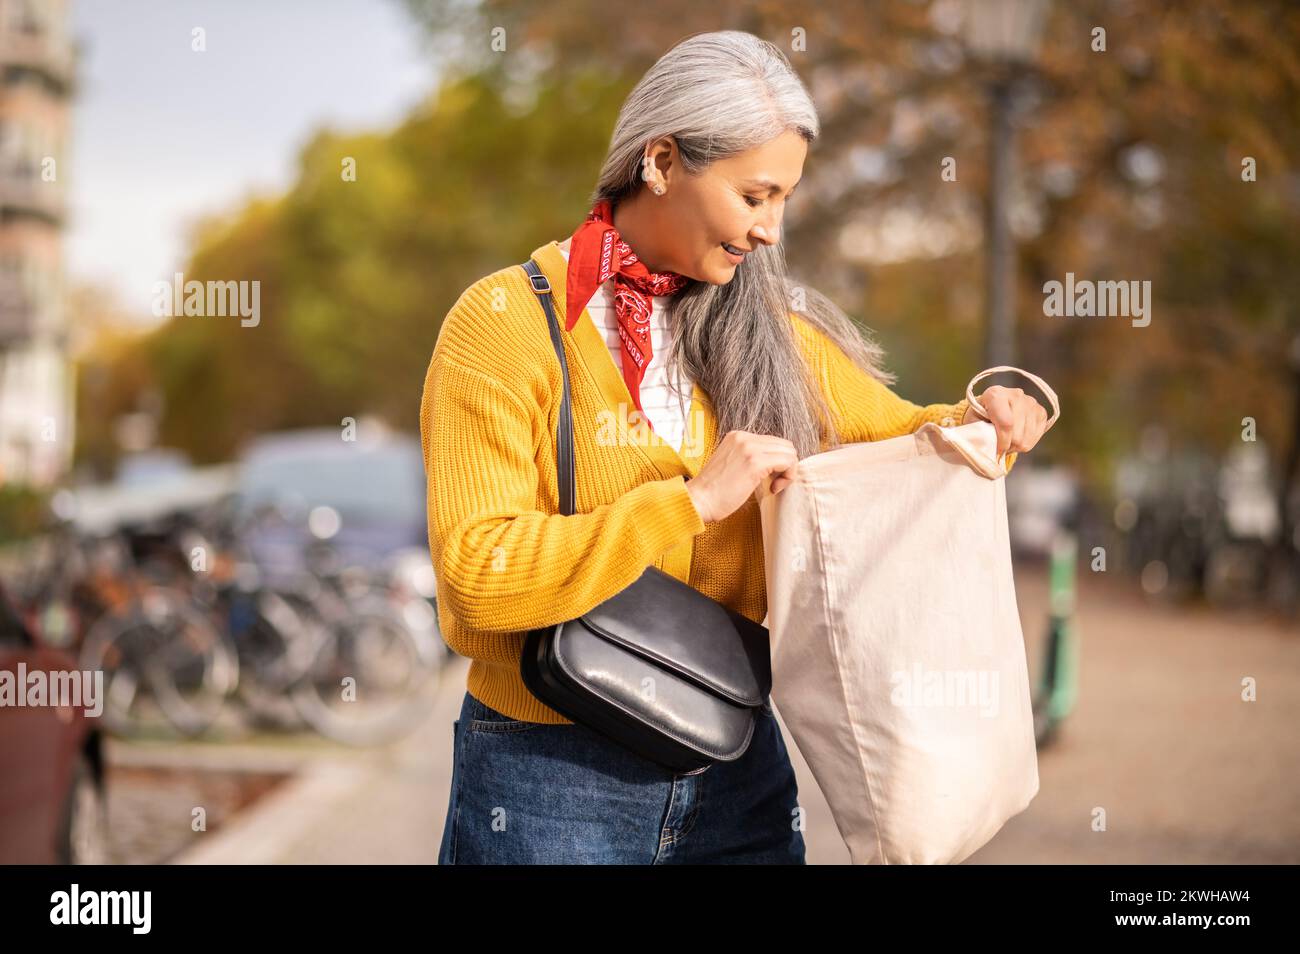 Woman with a papaer bag after shopping in a city street Stock Photo